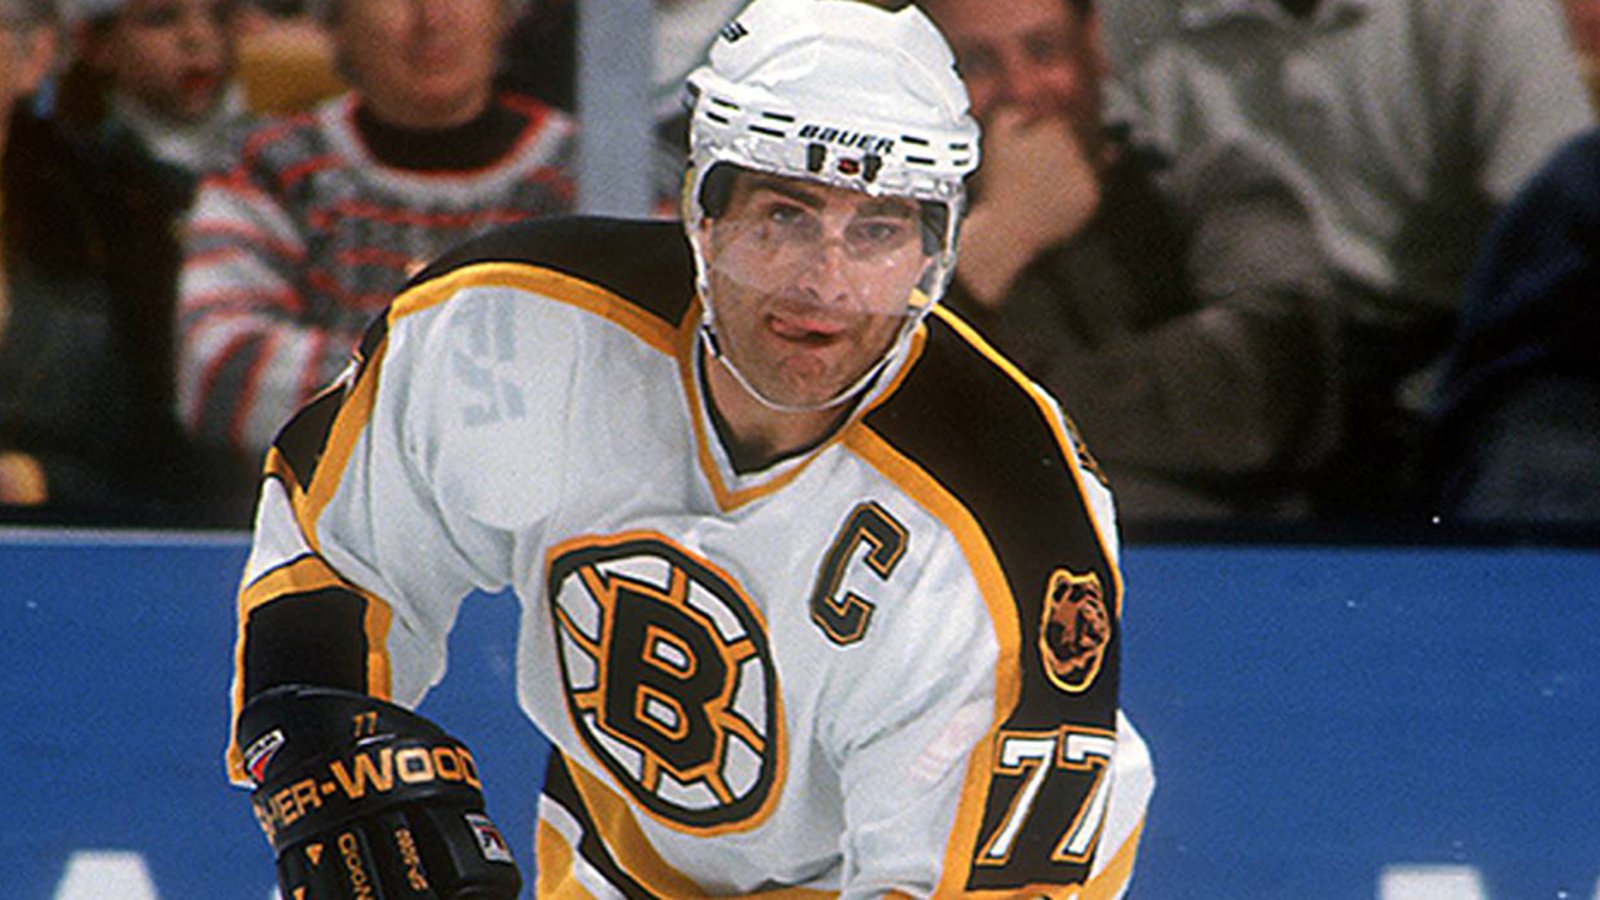 TBT Ray Bourque goes 4 for 4 in Accuracy Shooting 